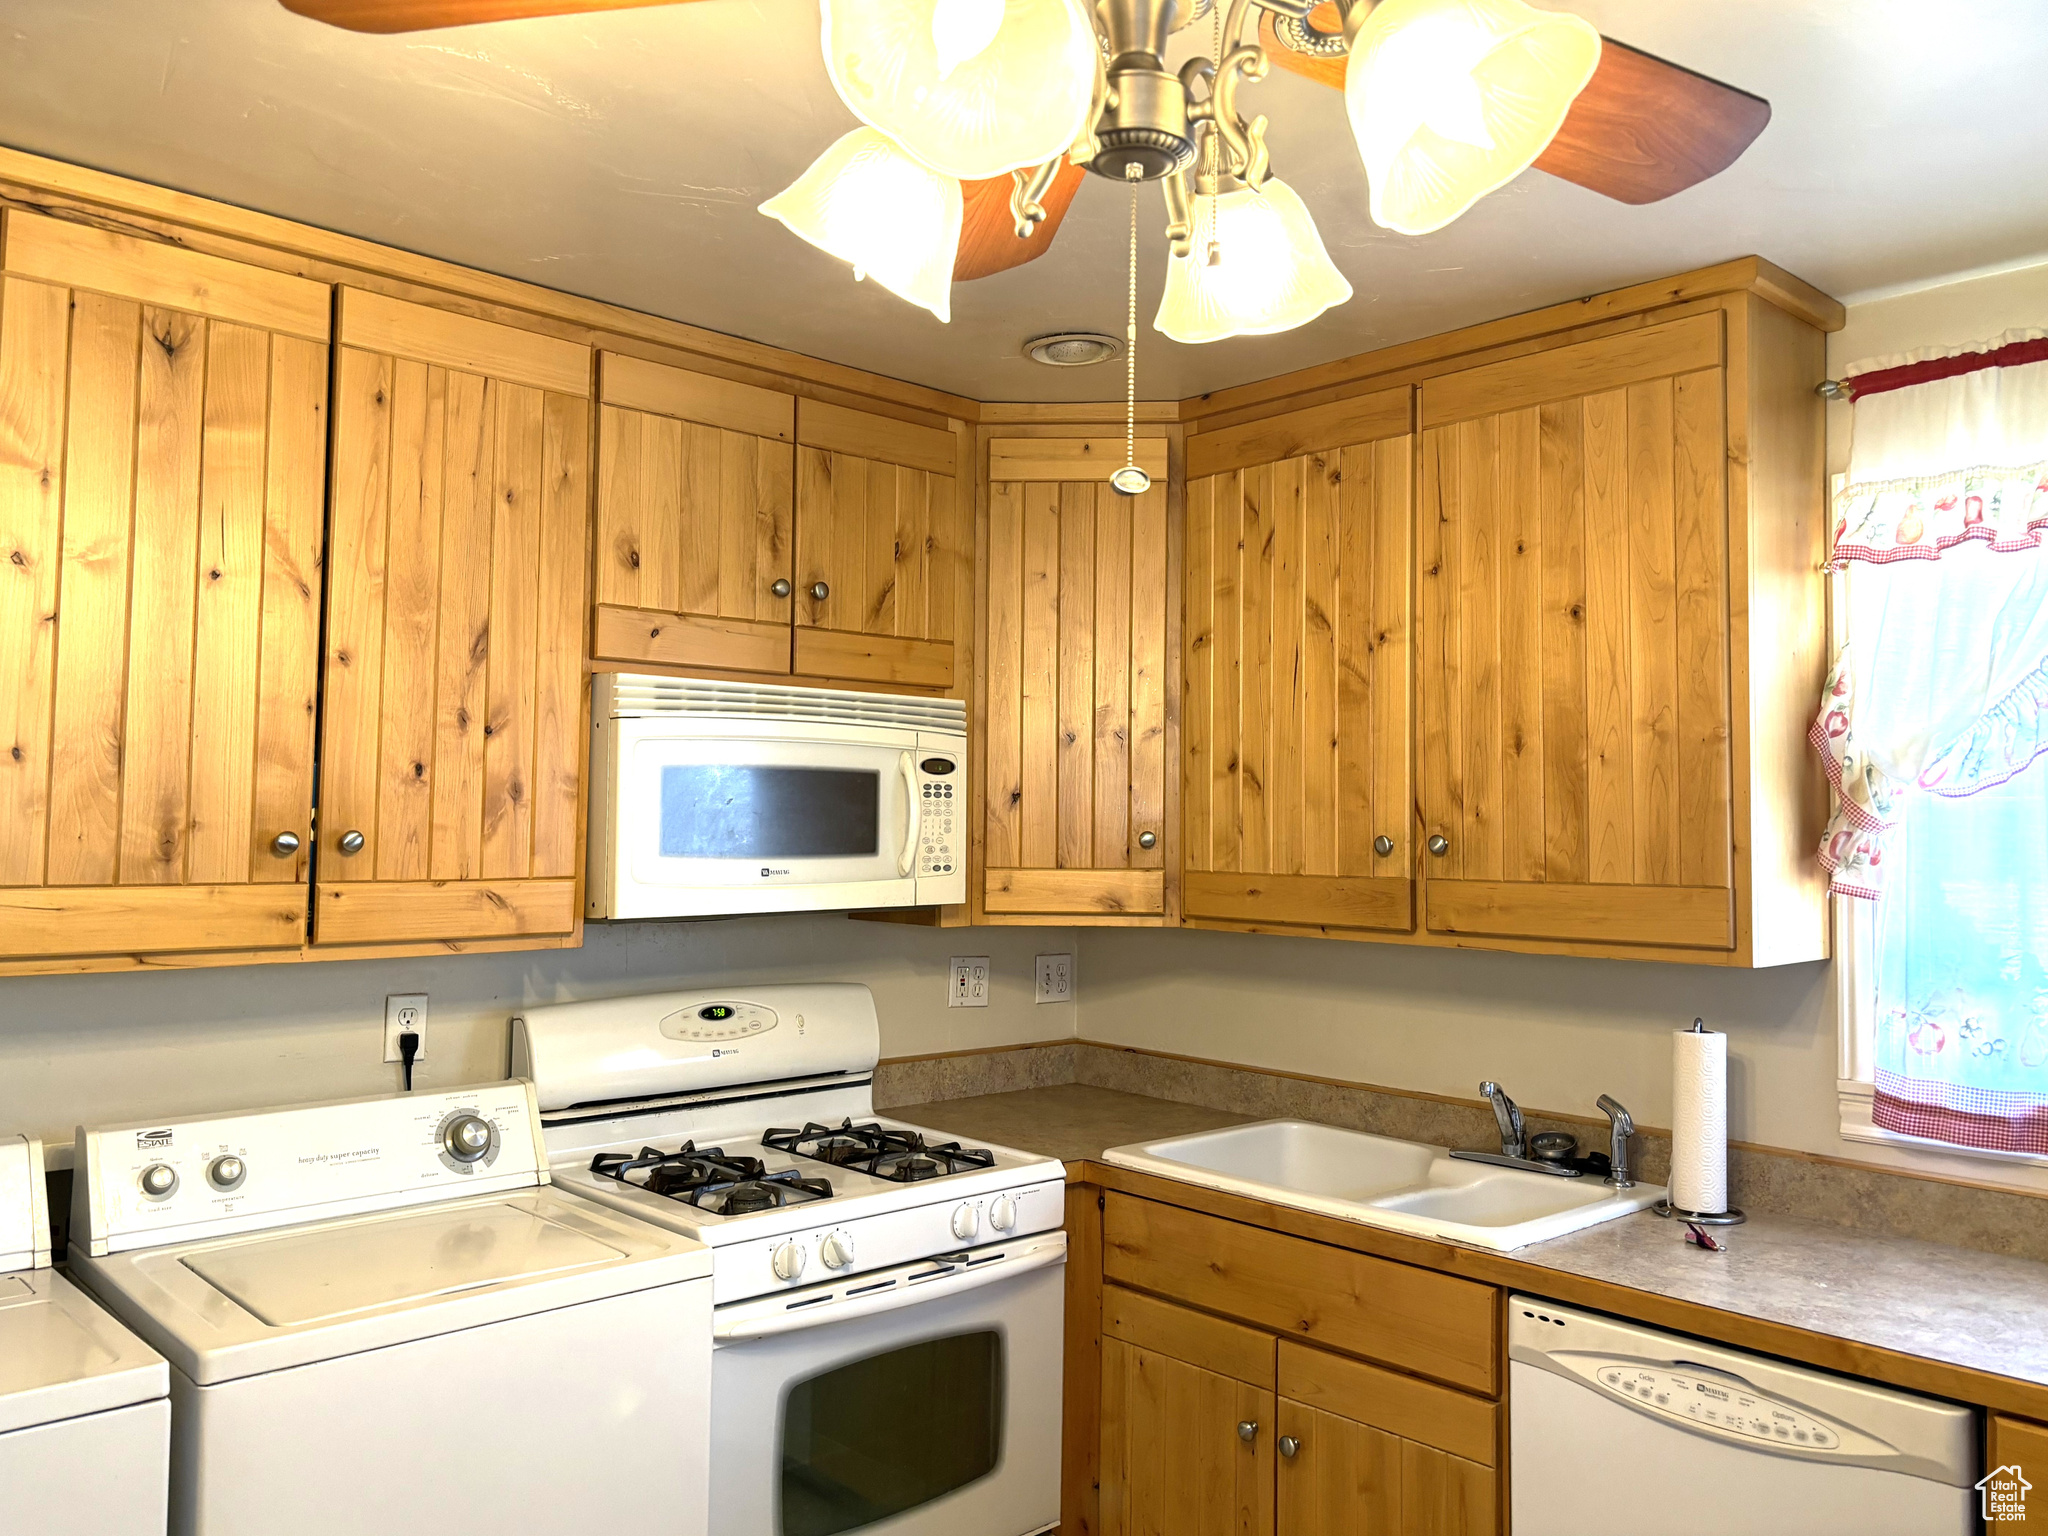 Kitchen with sink, white appliances, independent washer and dryer, and ceiling fan